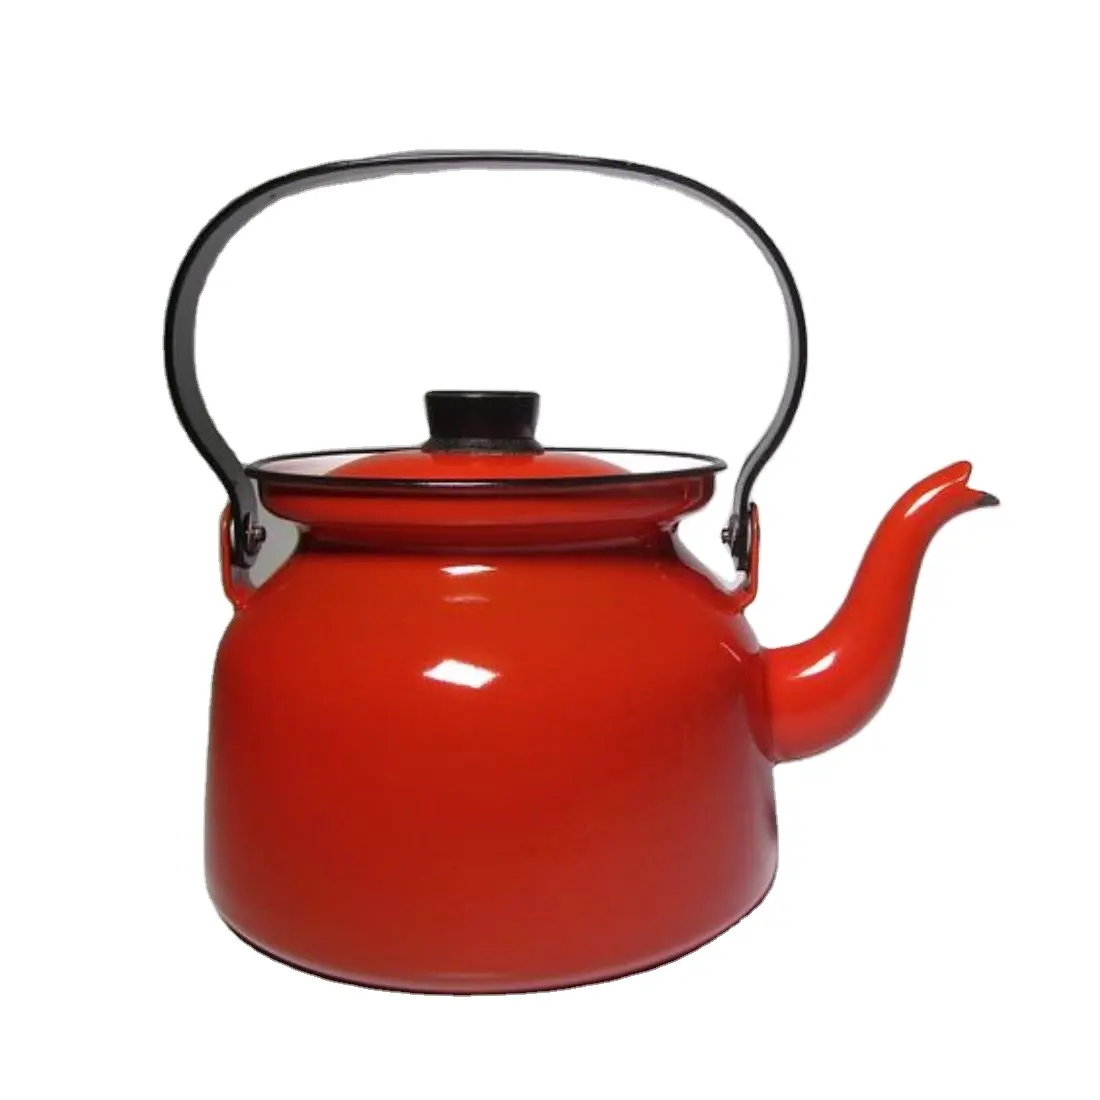 Red Enamel Stainless Steel Tea Serving Kettle for Hotels Supply Kitchenware Appliance Good Quality Metal Tea Pot Hot Sale price